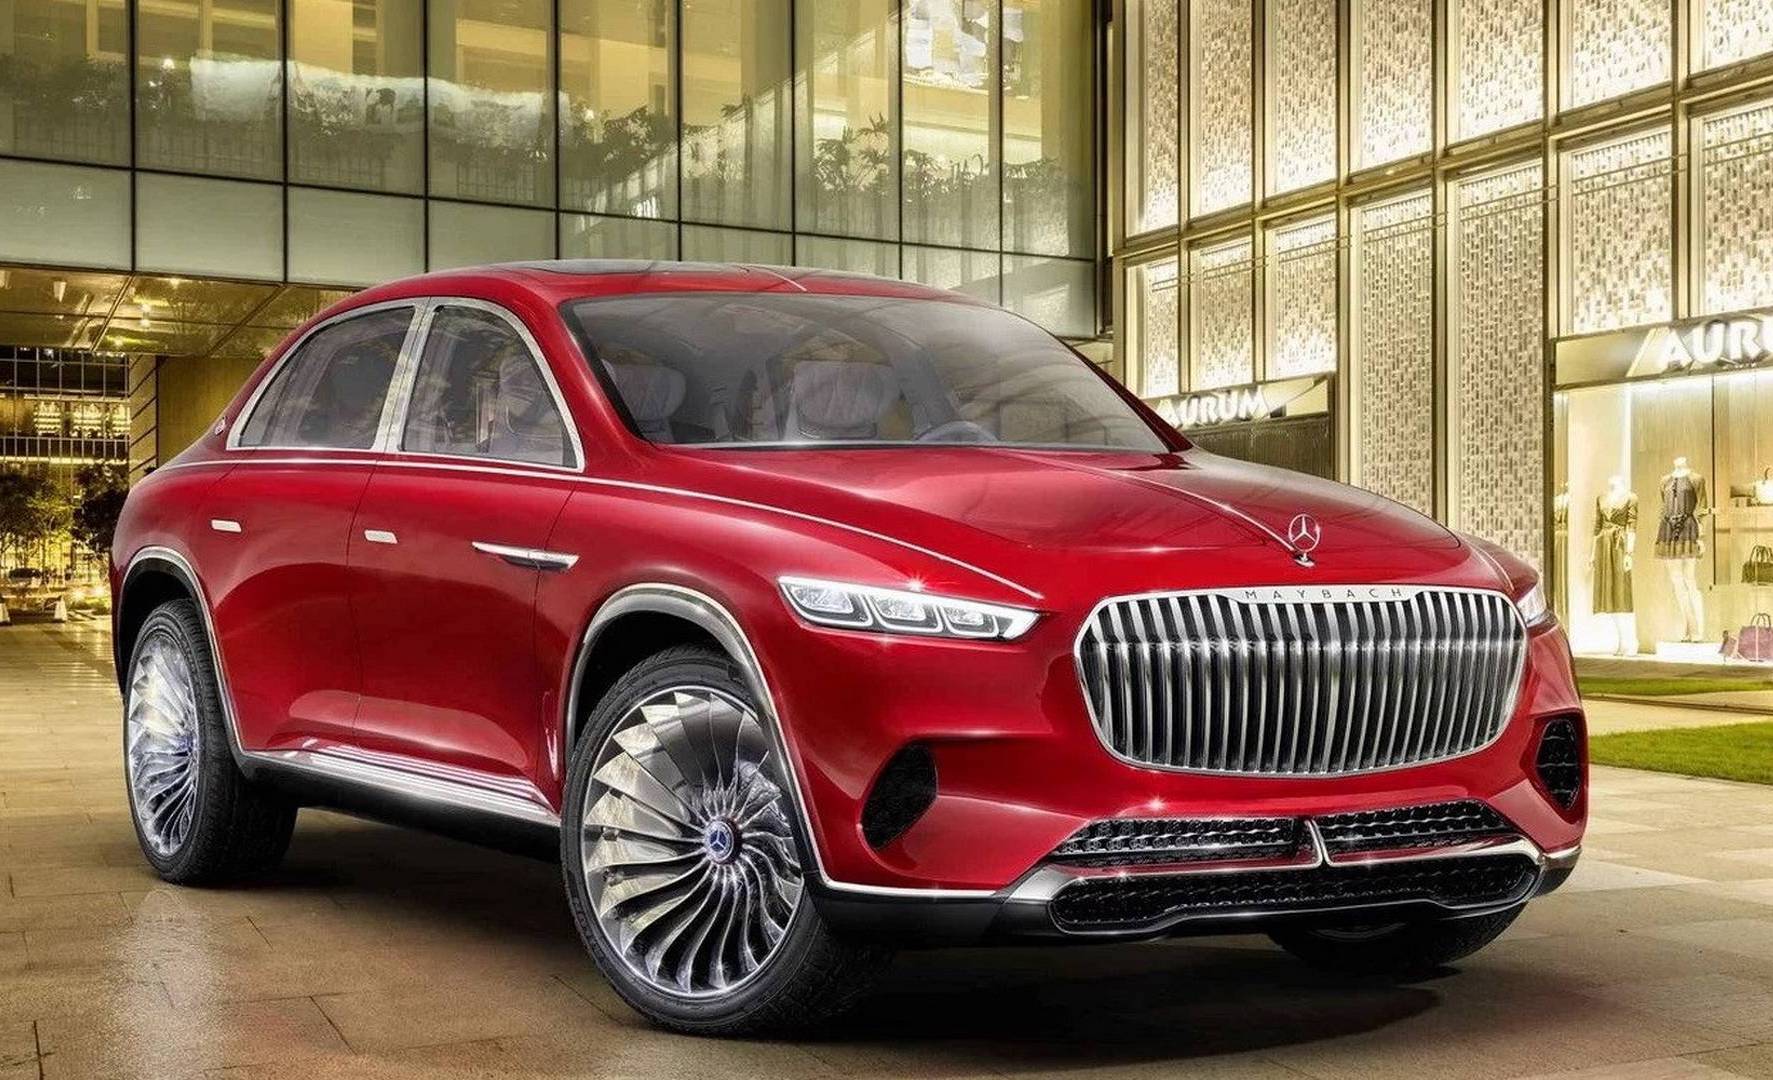 Vision MercedesMaybach Ultimate Luxury previews new SUV PerformanceDrive